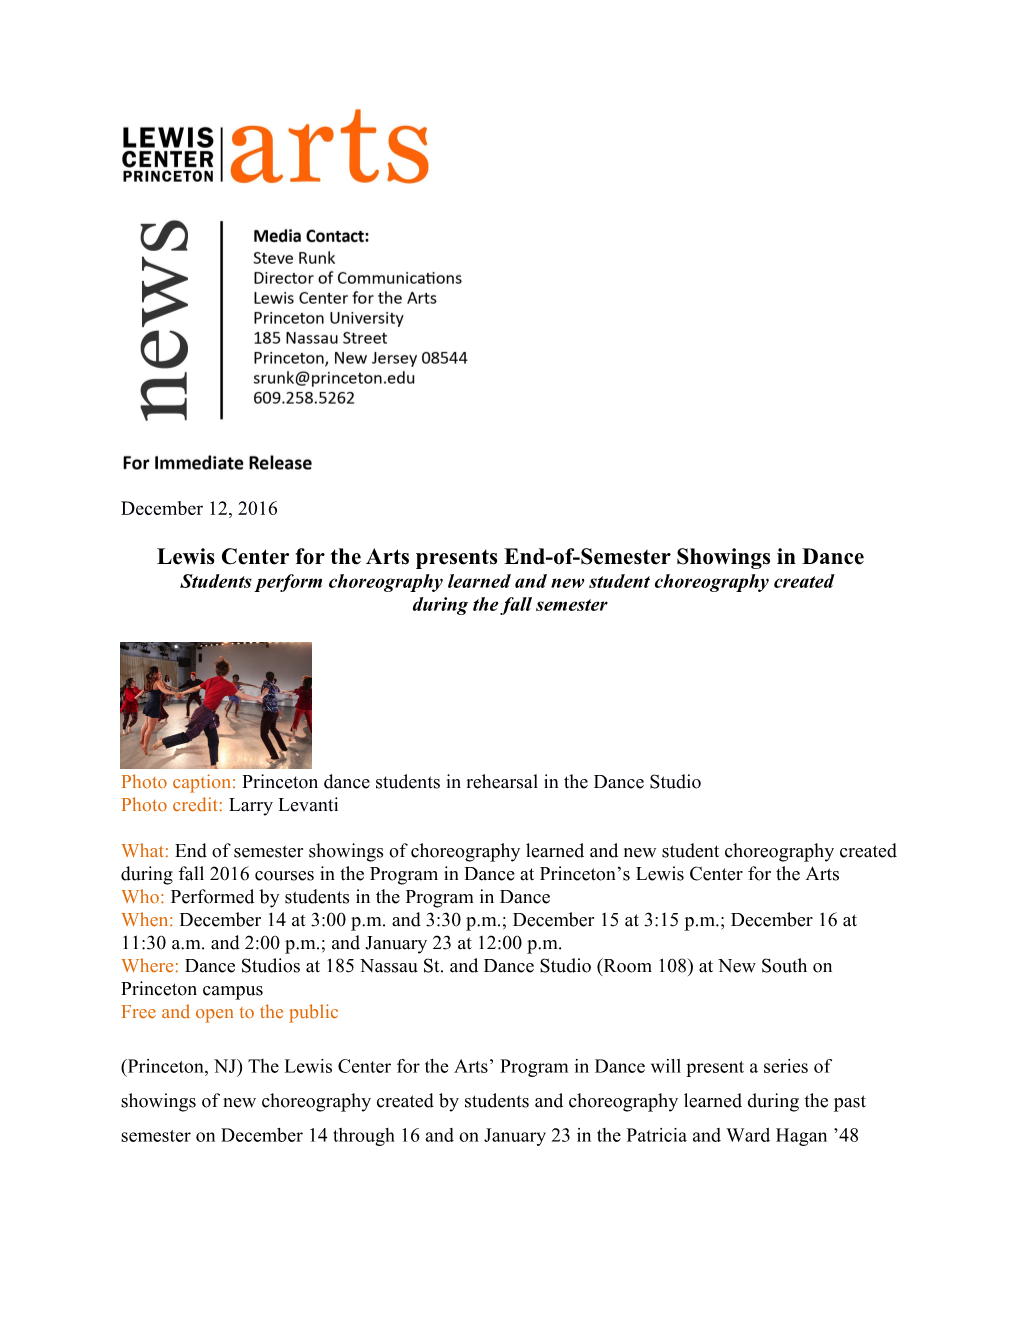 Lewis Center for the Arts Presents End-Of-Semester Showings in Dance